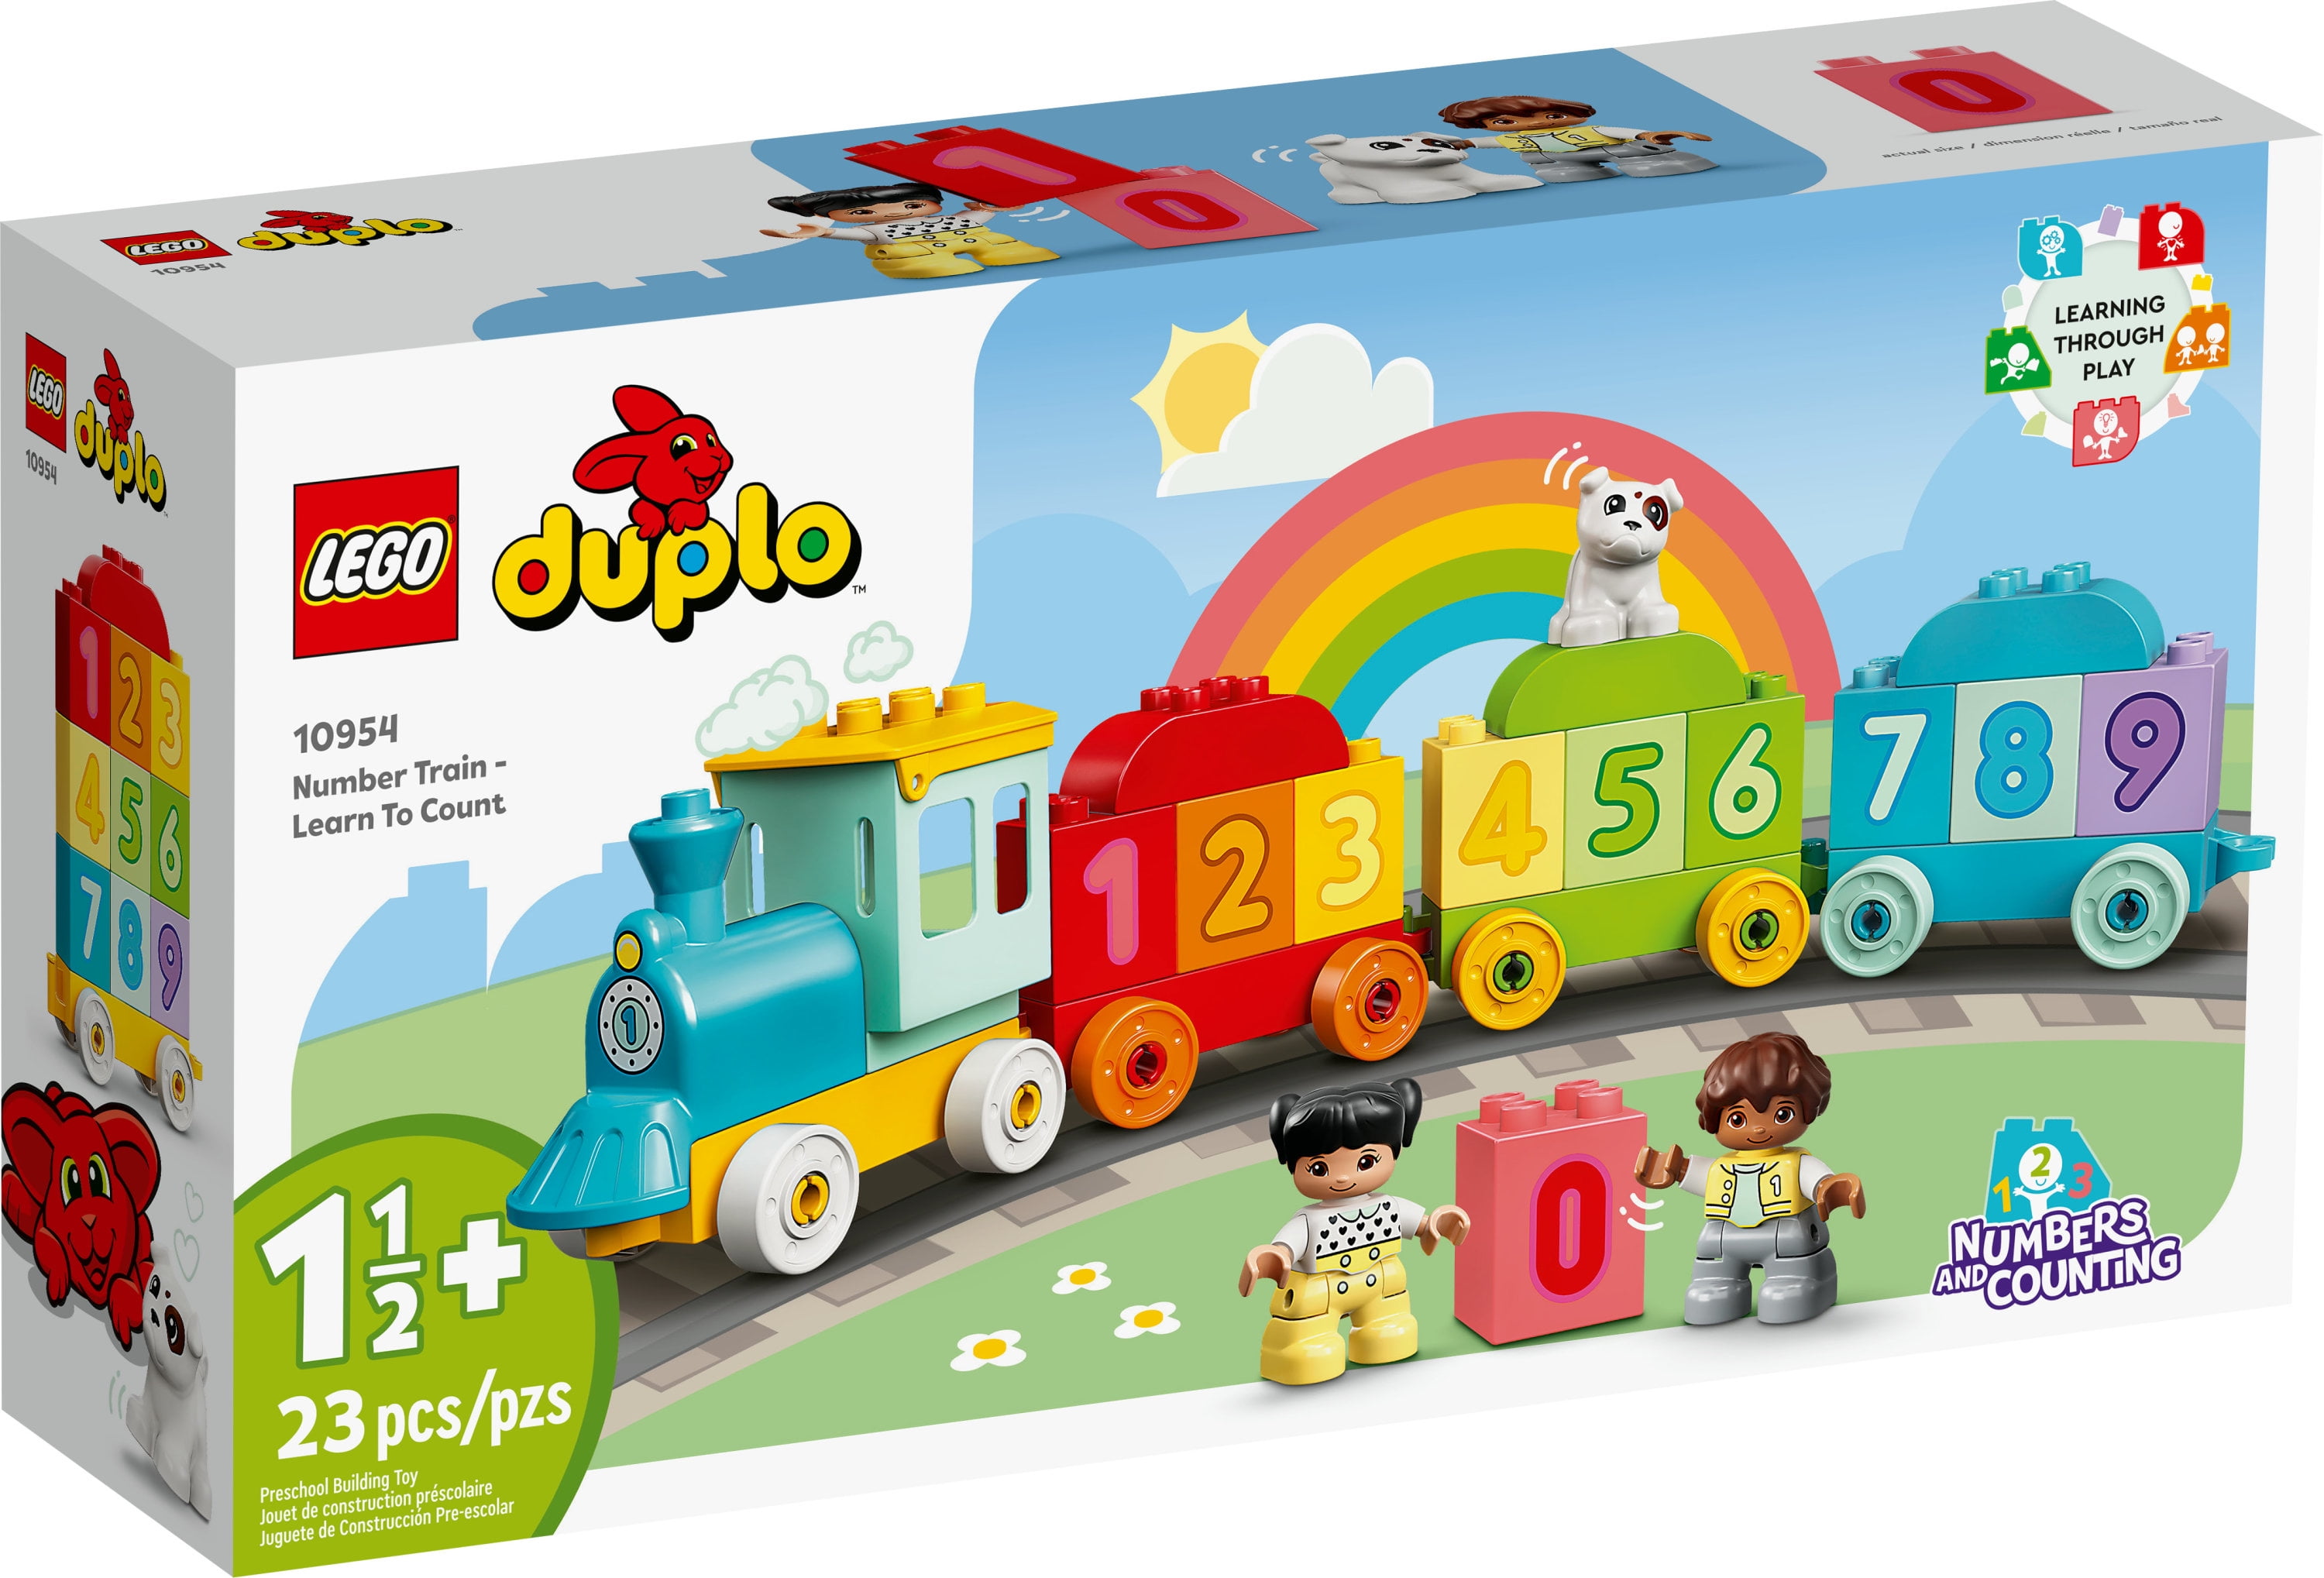 LEGO DUPLO First Number Train 10954 Fine Motor Skills Toy with Bricks for Learning Numbers, Preschool Educational Toys for 1.5 - 3 Year Toddlers, Girls & Boys, Early Development Activity Set Walmart.com